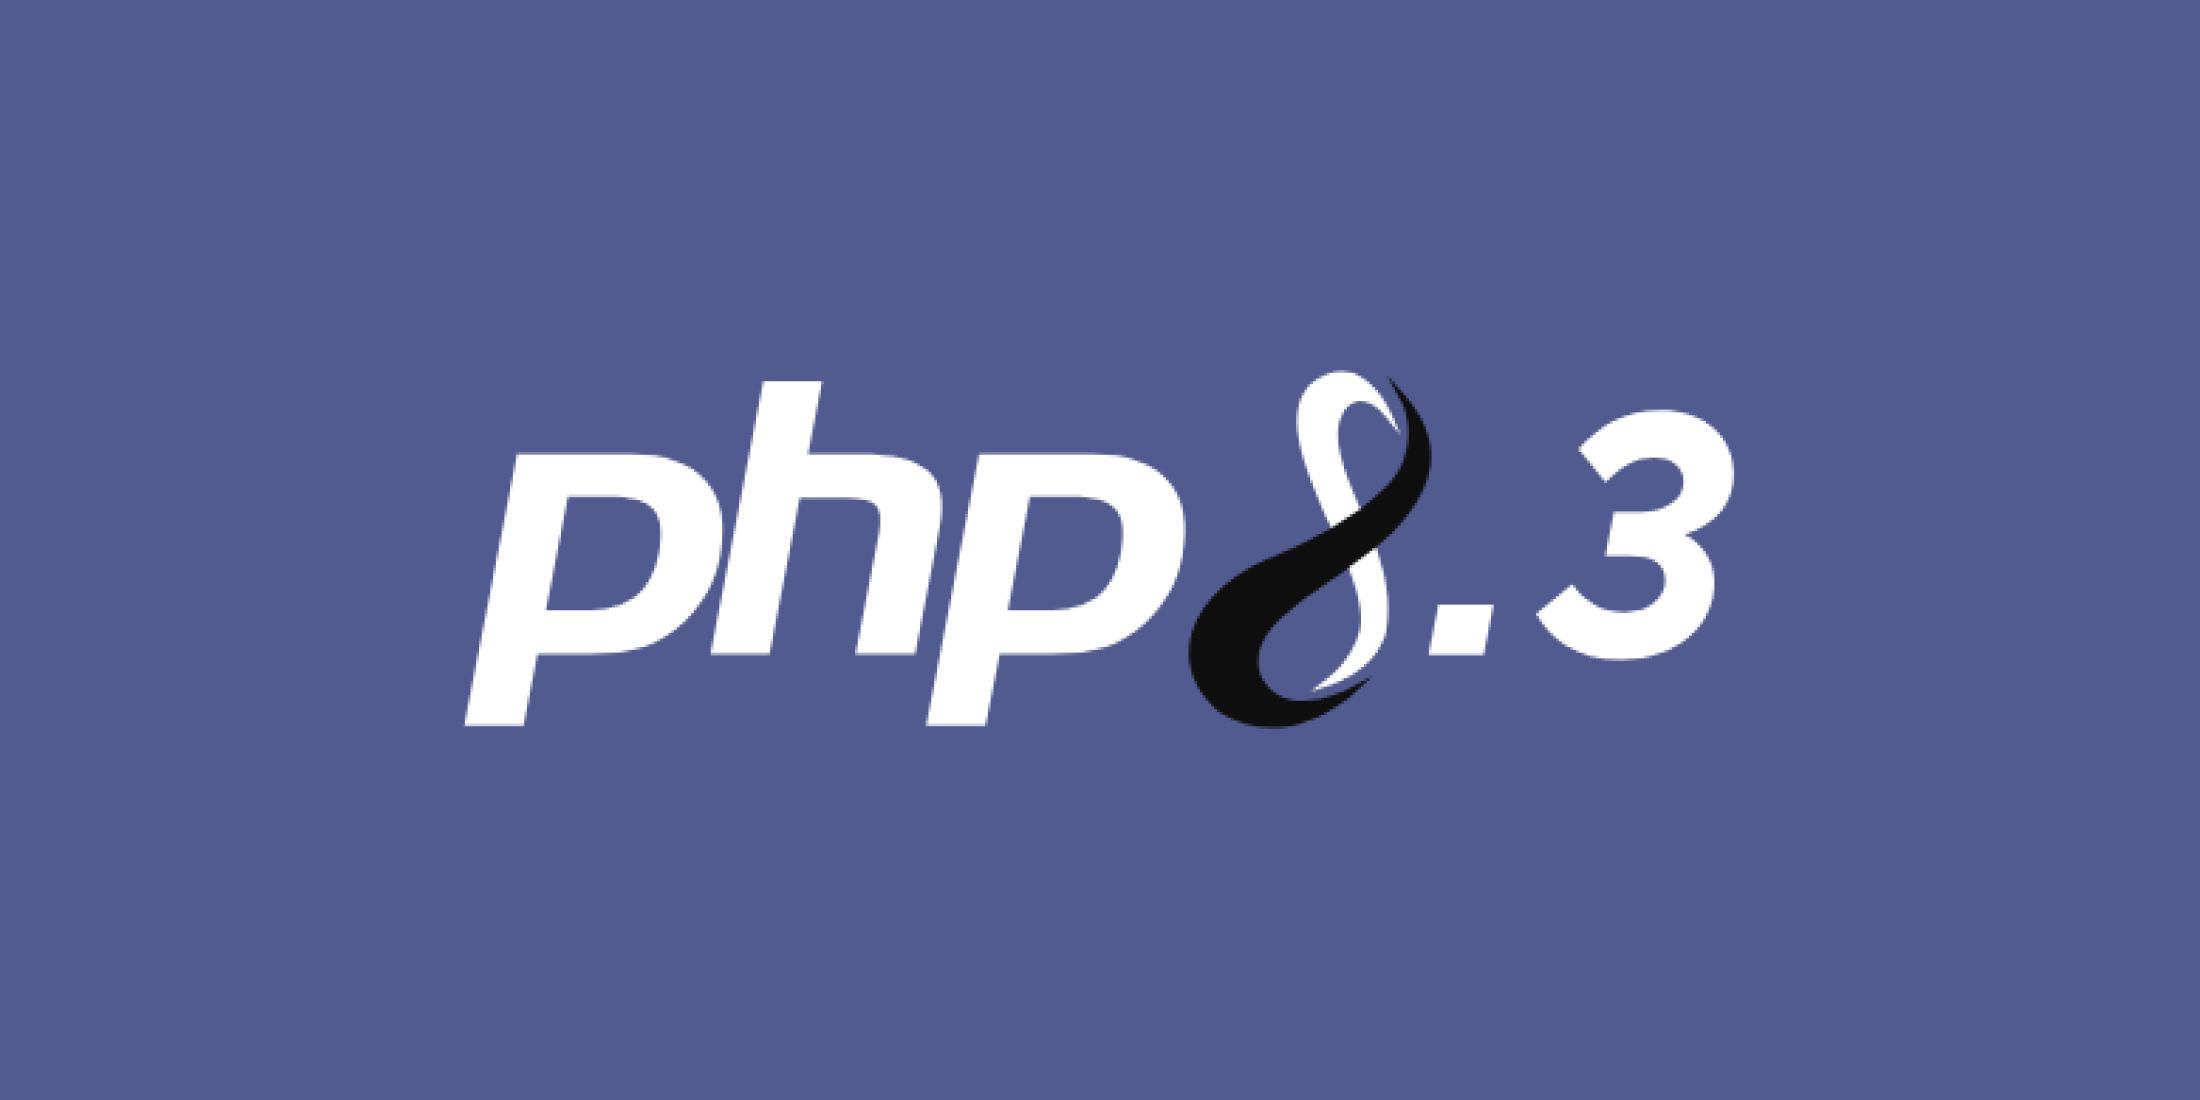 Make your app faster with PHP 8.3 image